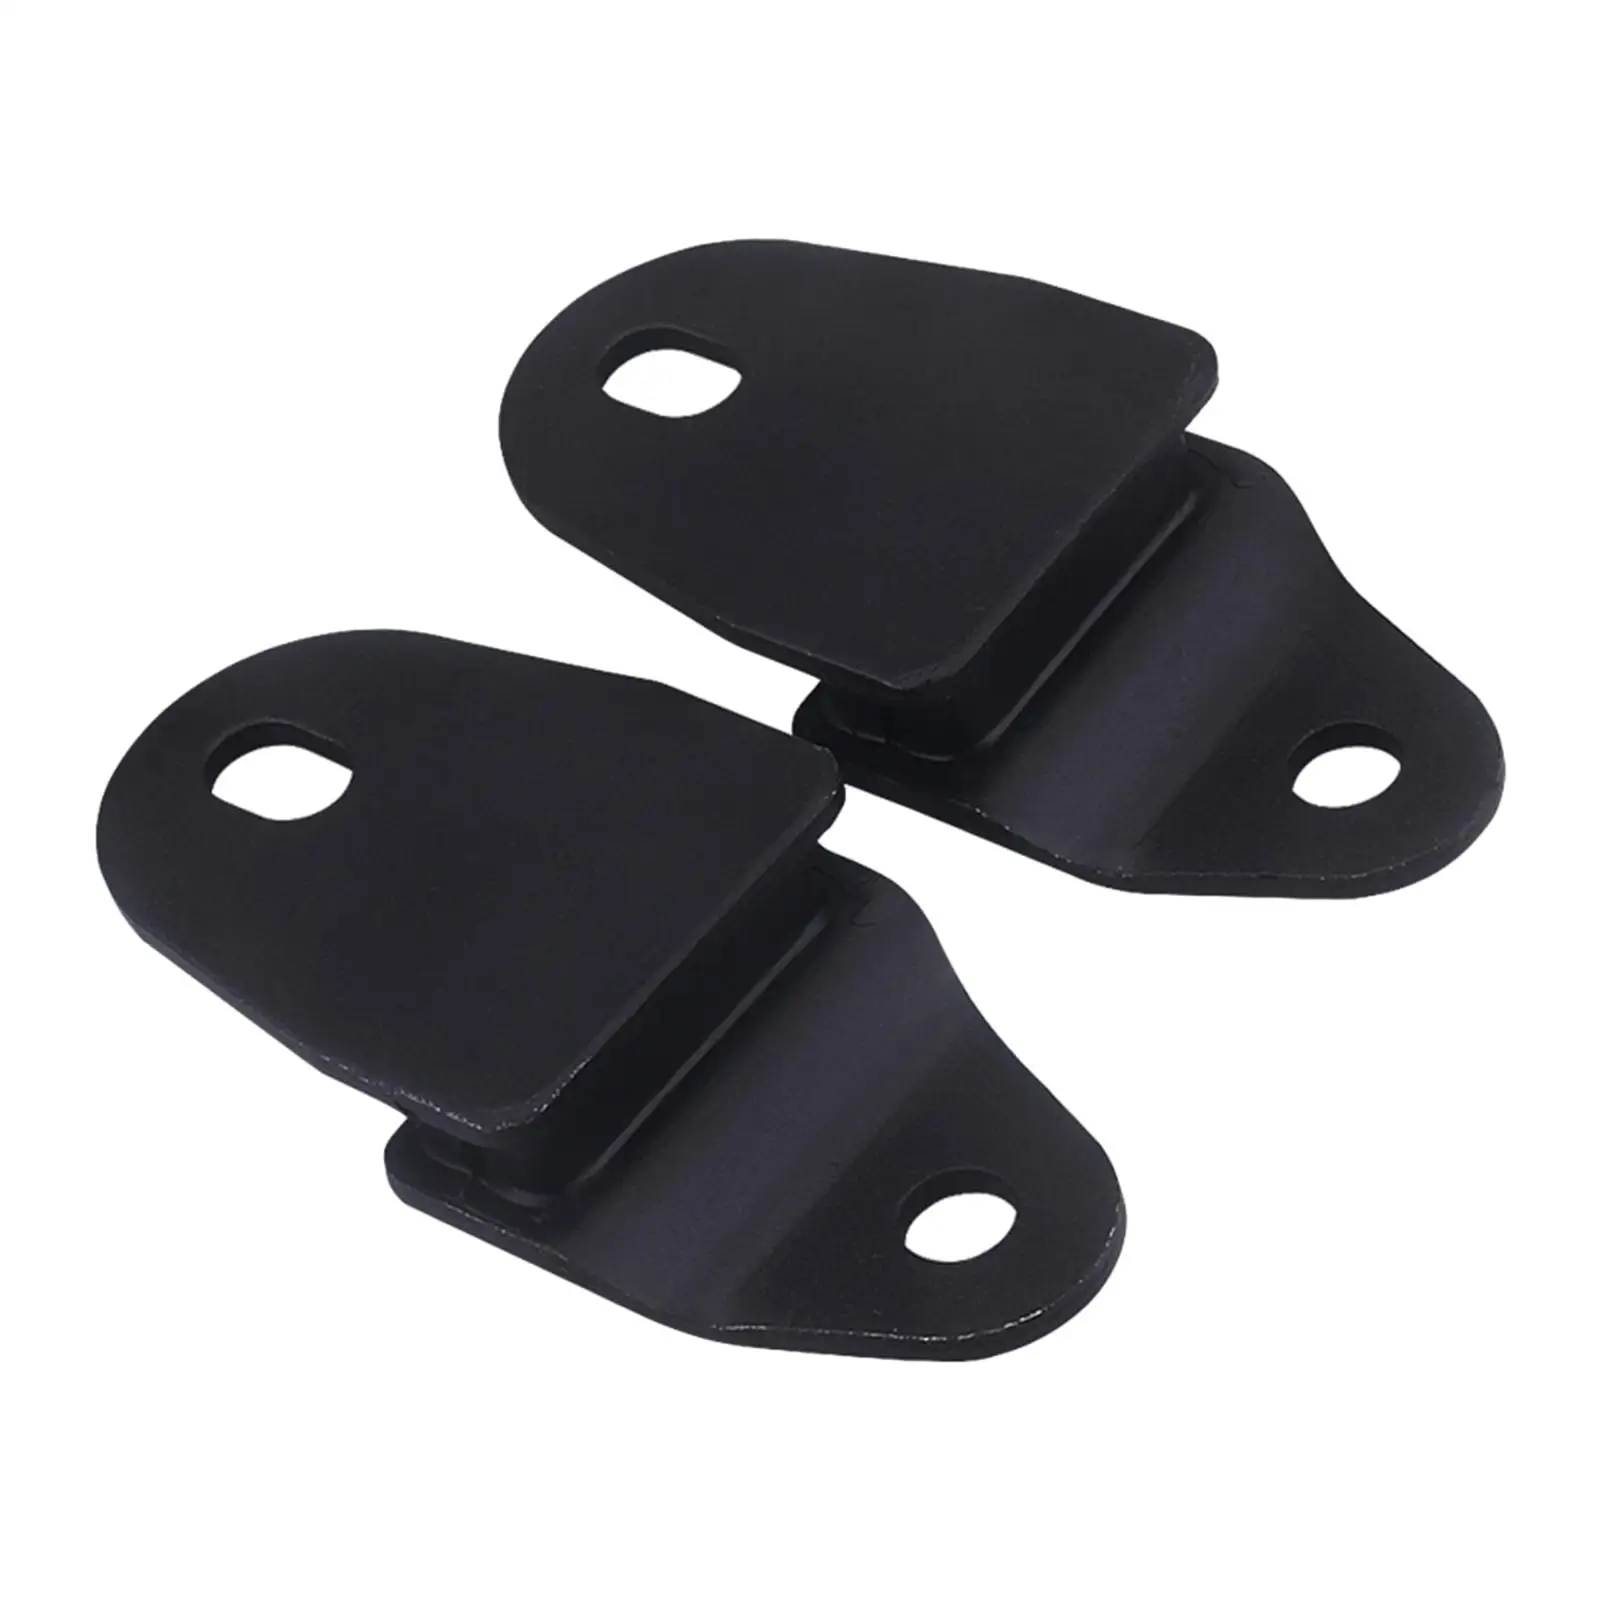 Exhaust   Bracket Hanger Stay Mounts Fits for  Banshee 350 YFZ350 1987-2006,  the product fits for your before placing order